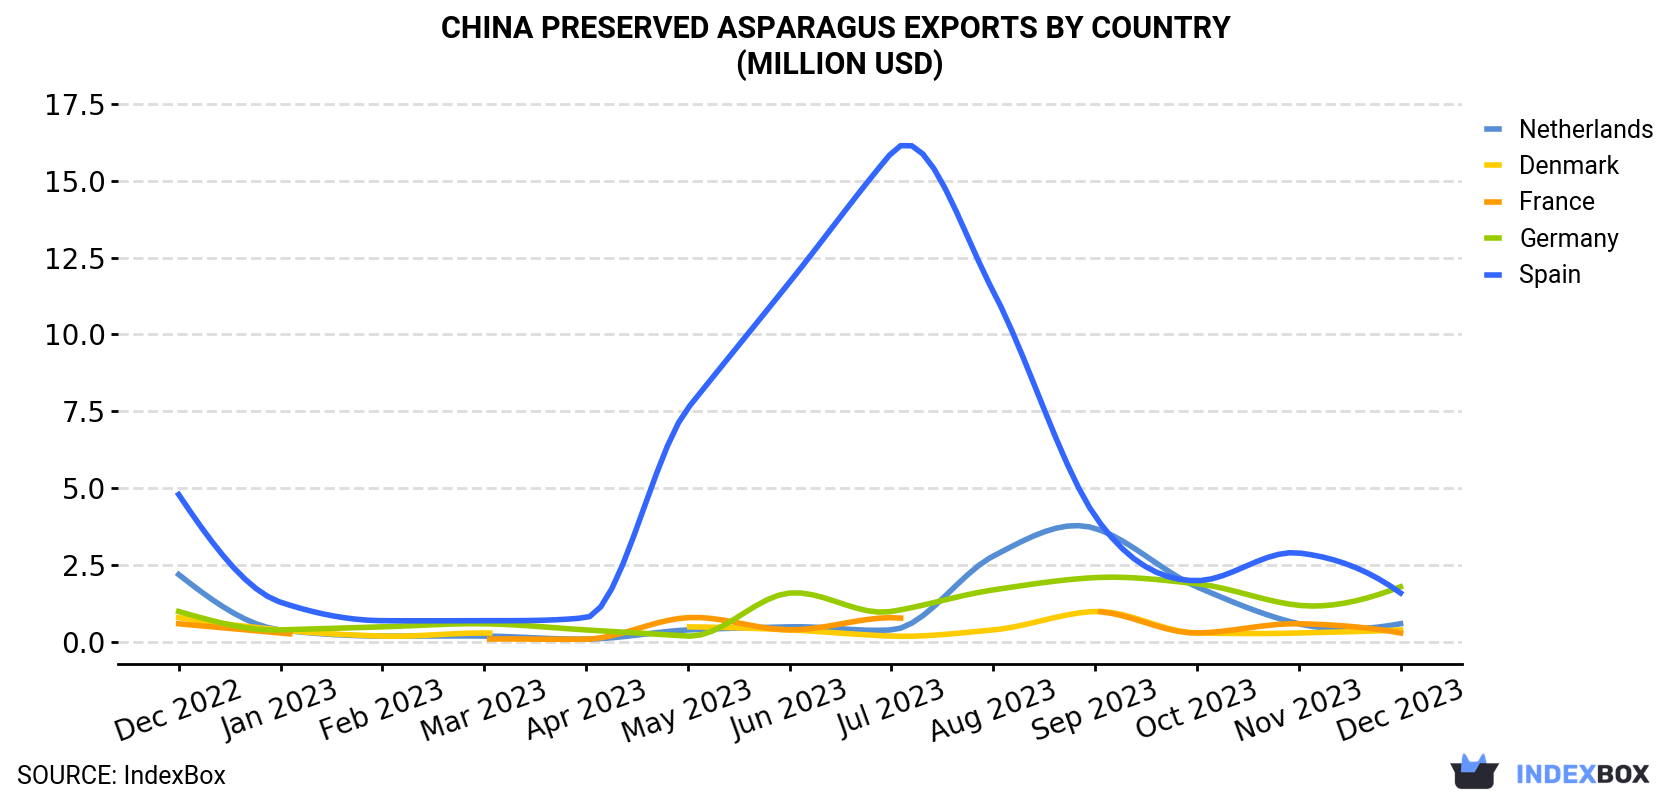 China Preserved Asparagus Exports By Country (Million USD)